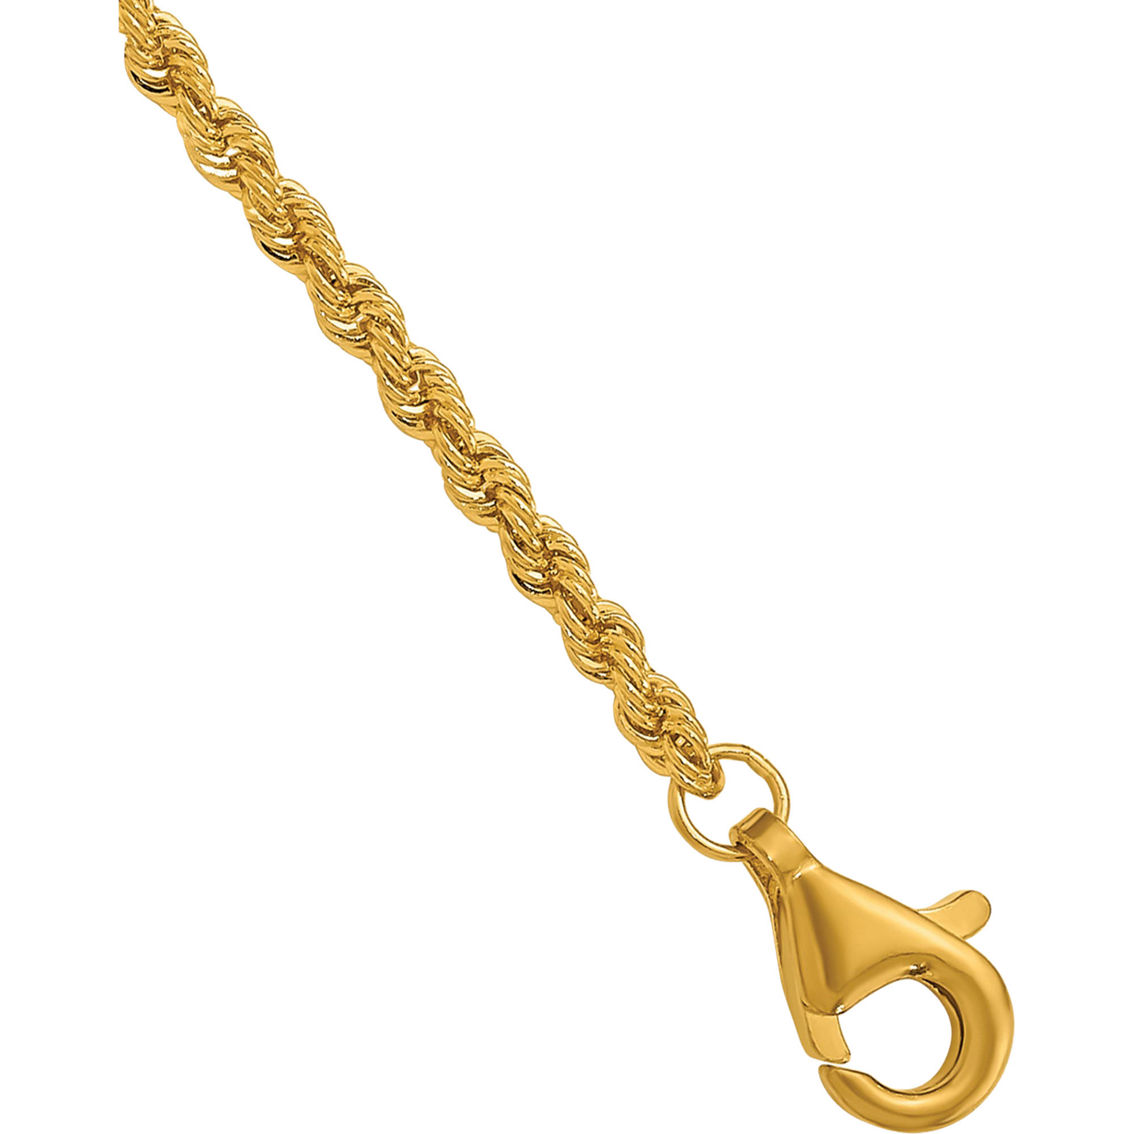 24K Pure Gold 22 in. Rope Chain Necklace - Image 4 of 7